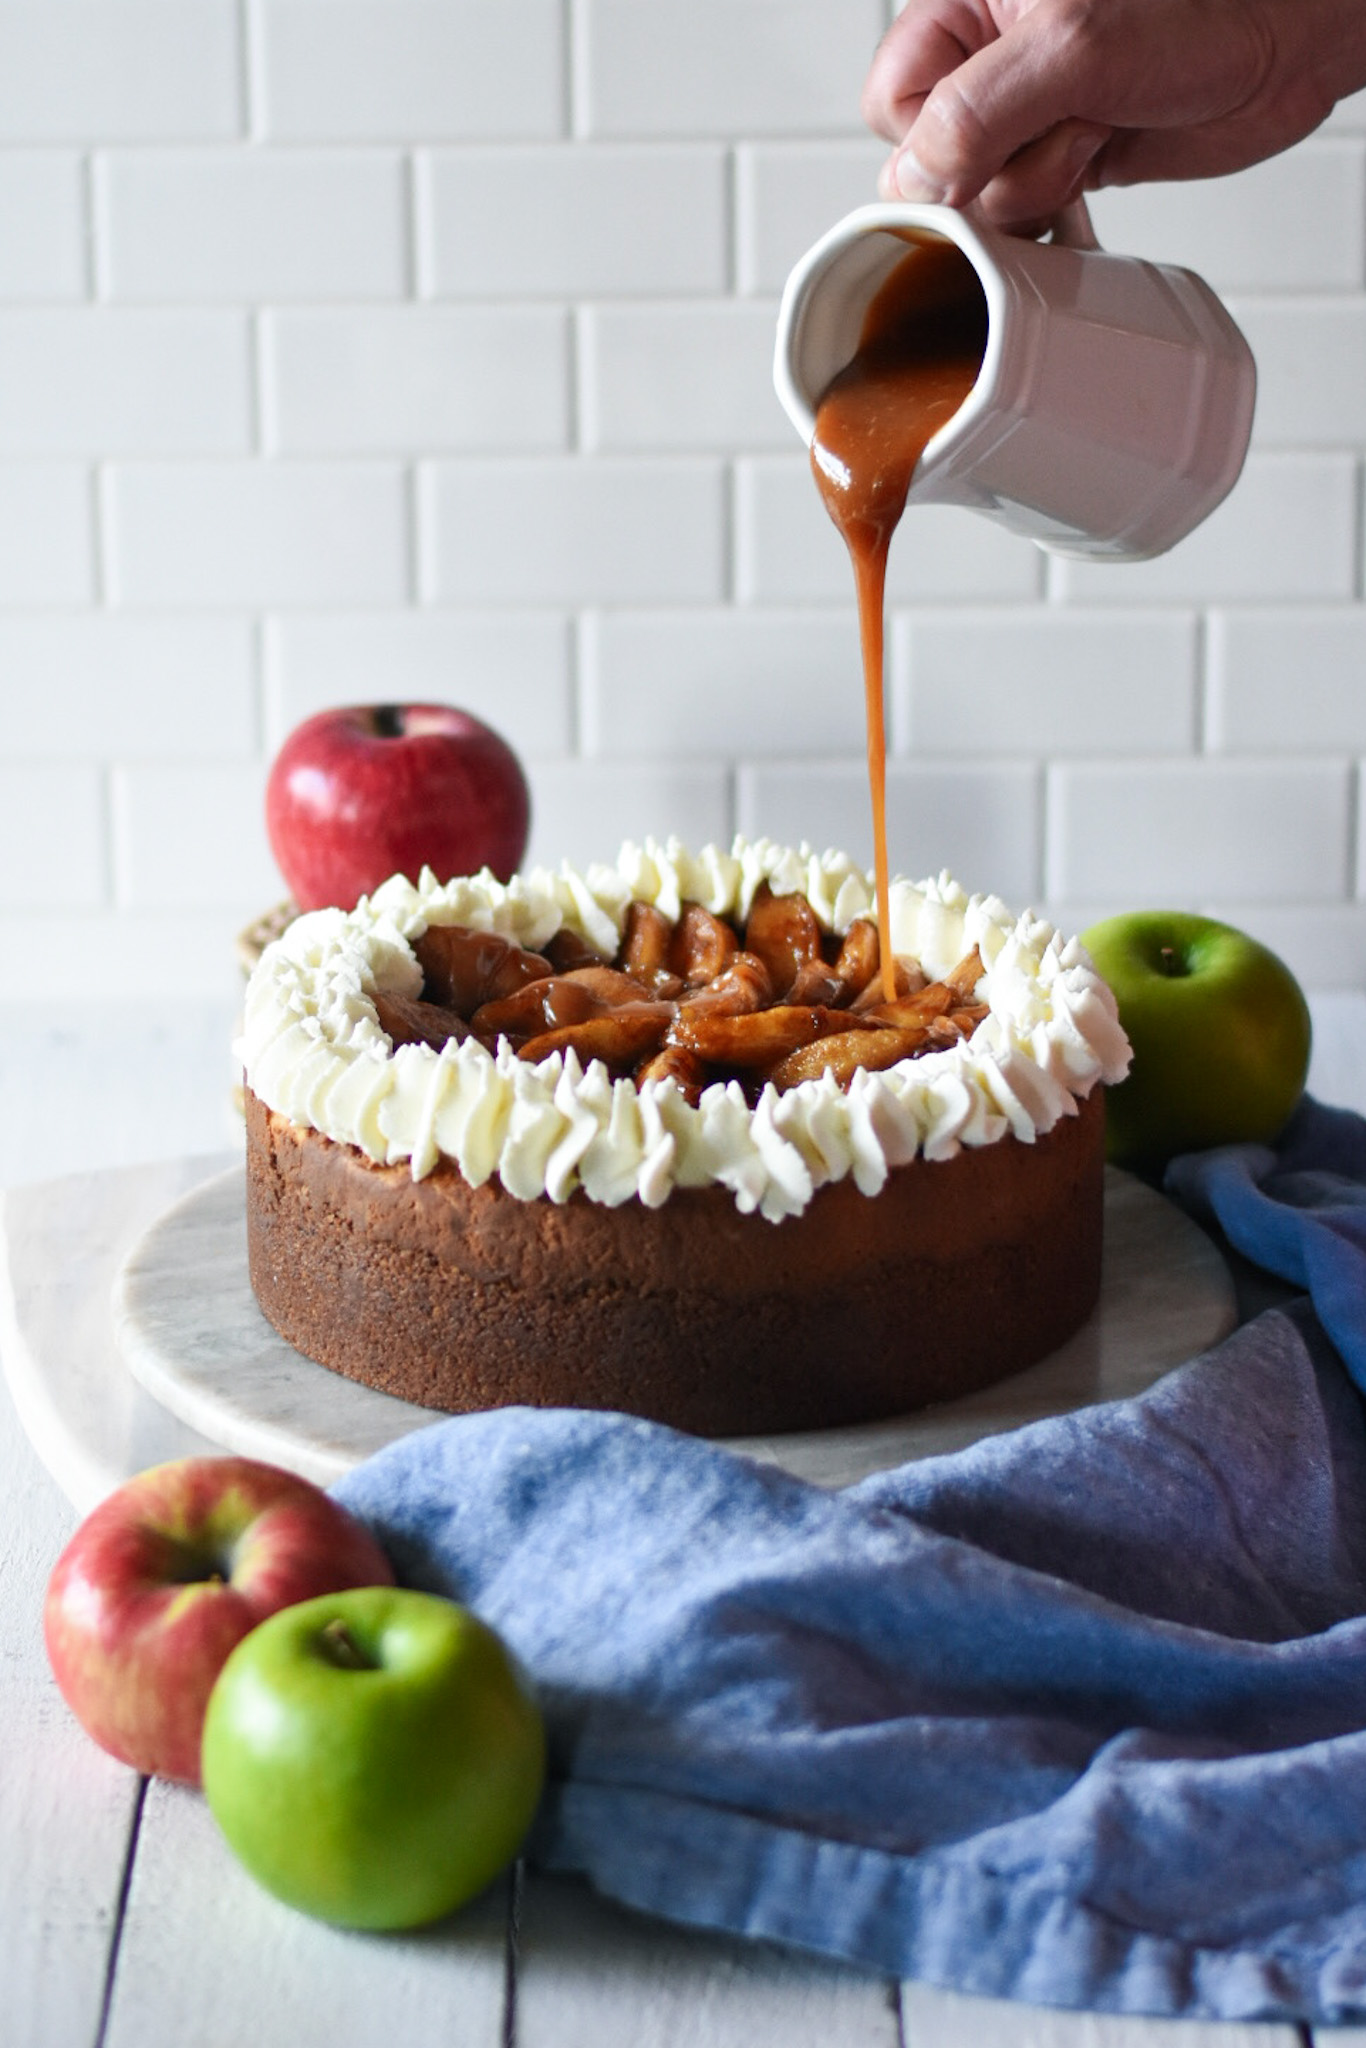 caramel apple cheesecake with caramel being poured on top